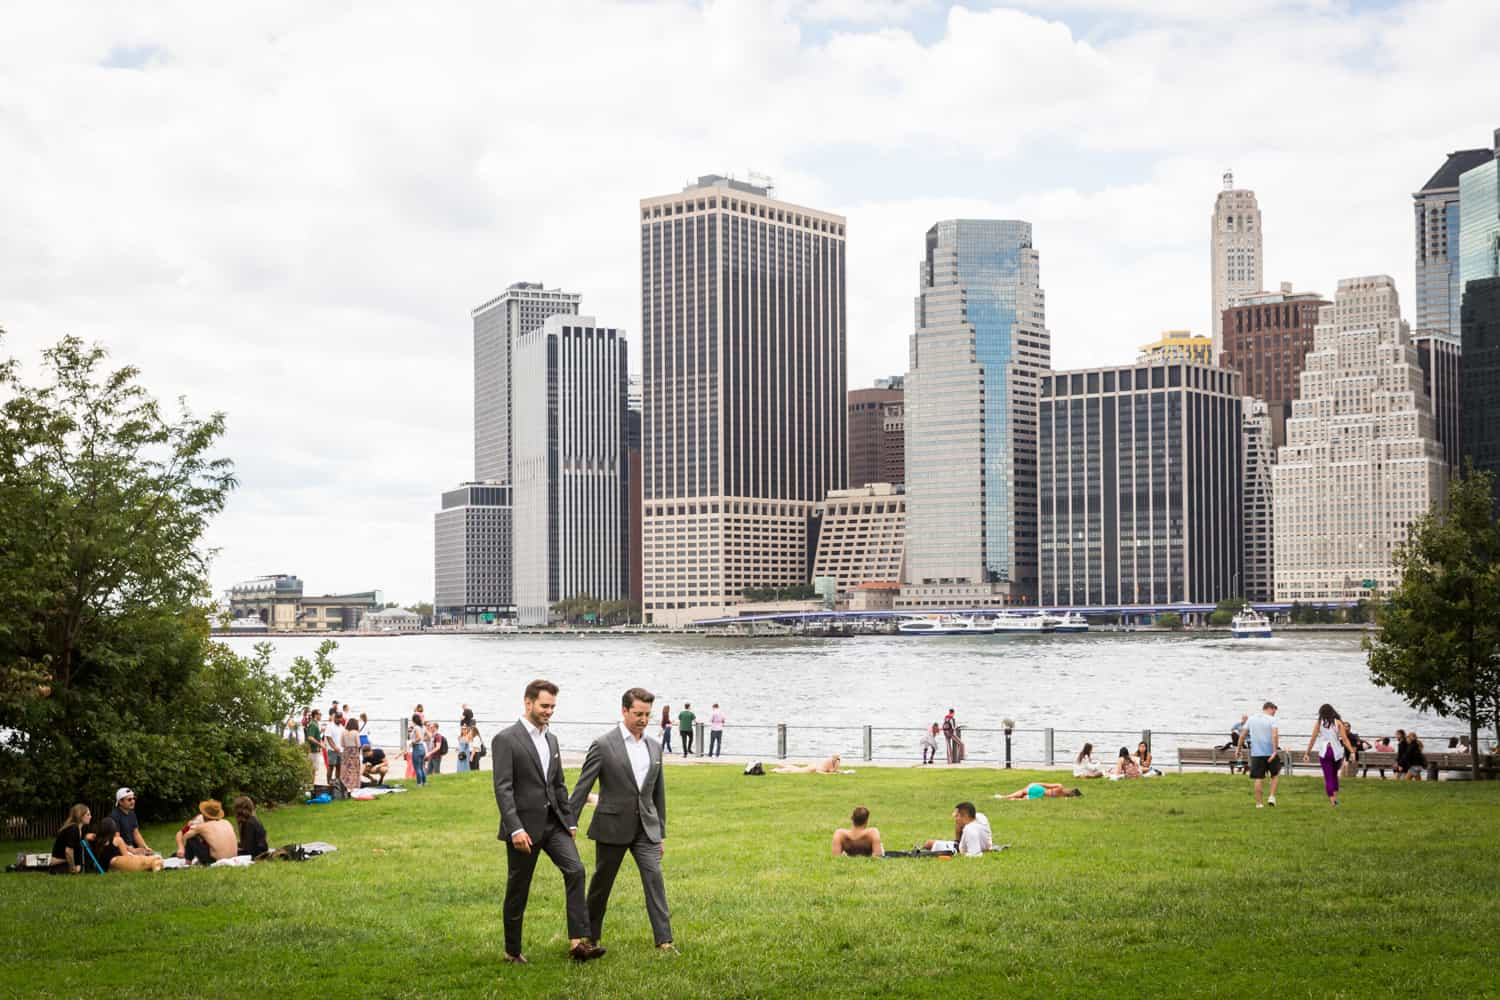 Greenpoint Loft wedding photos of two grooms walking across grass with NYC skyline in background